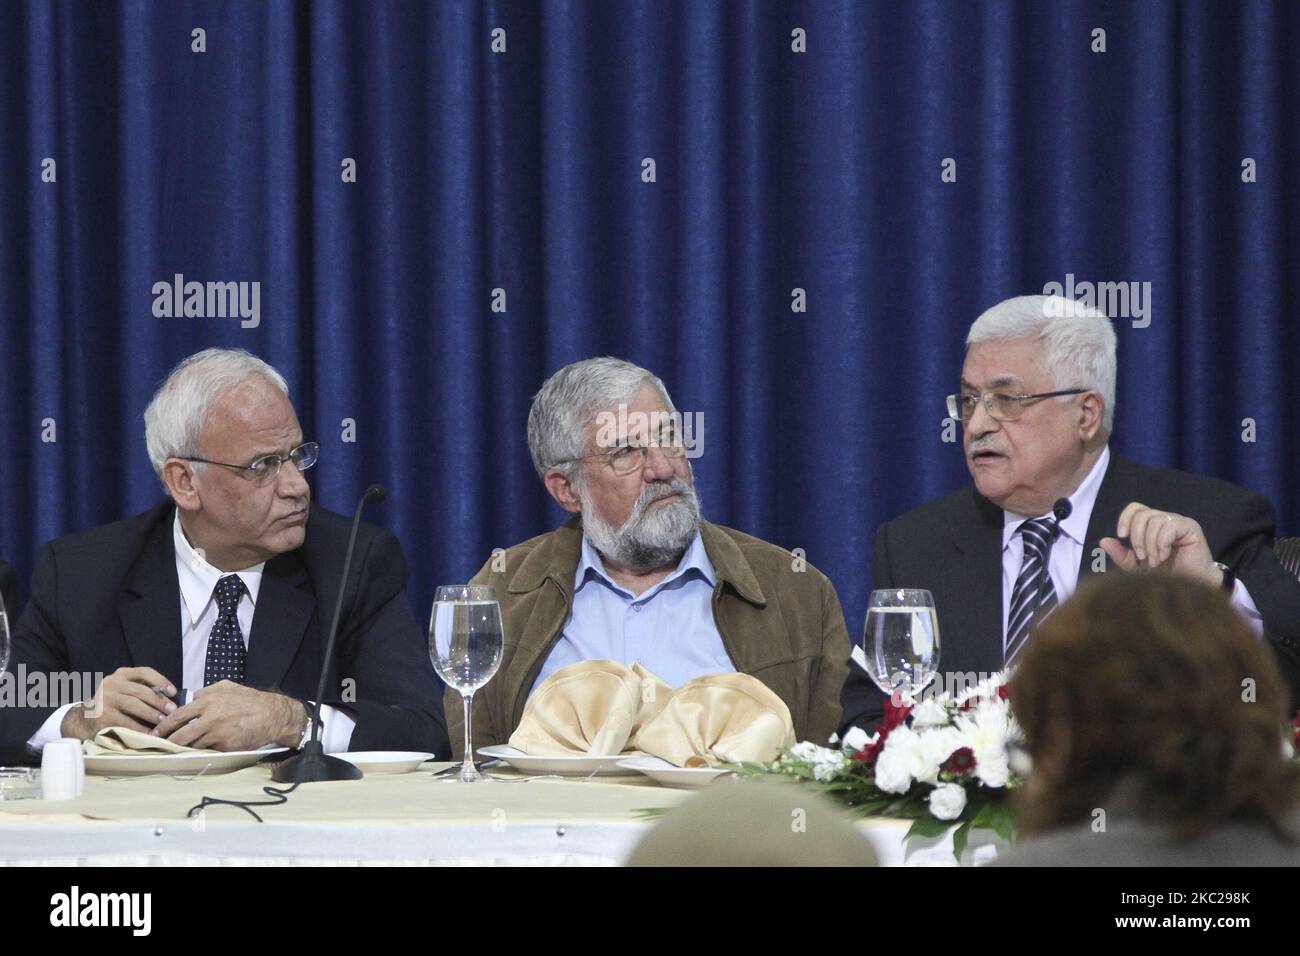 Senior Palestinian politician and diplomat and top PLO official Saeb Erekat (left) with Israeli politician Amram Mitzna (center) and Palestinian President Mahmoud Abbas (right) in the West Bank city of Ramallah on 19 December, 2010. Senior Palestinian politician and diplomat and top PLO official Saeb Erekat is in critical condition with COVID-19 after he was hospitalized at Israel's Hadassah Medical Center in Jerusalem on Sunday, 18 October, 2020. (Photo by Mati Milstein/NurPhoto) Stock Photo